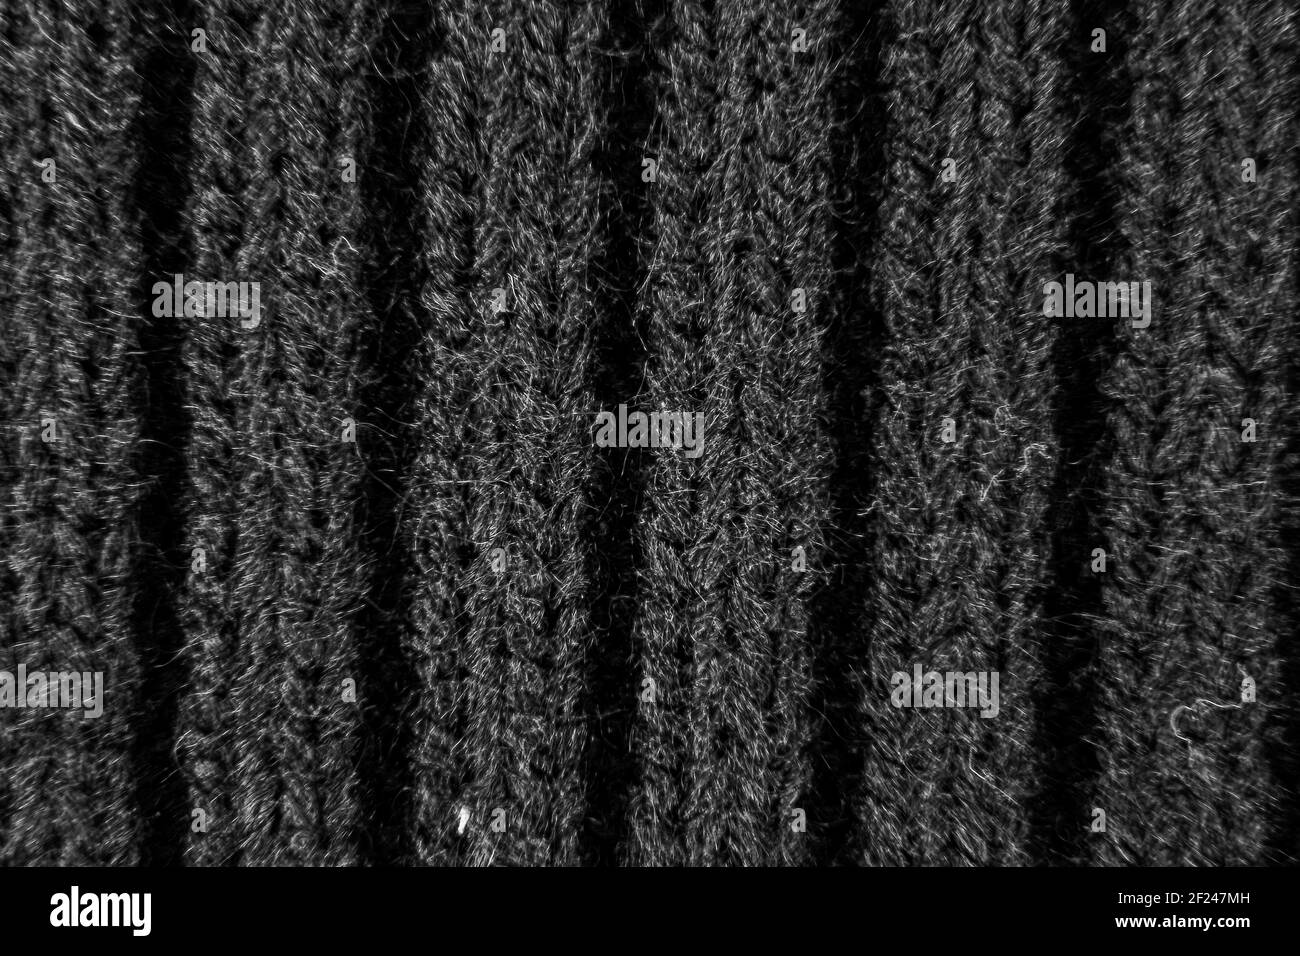 Image of black and white fabric background of woolen look Stock Photo